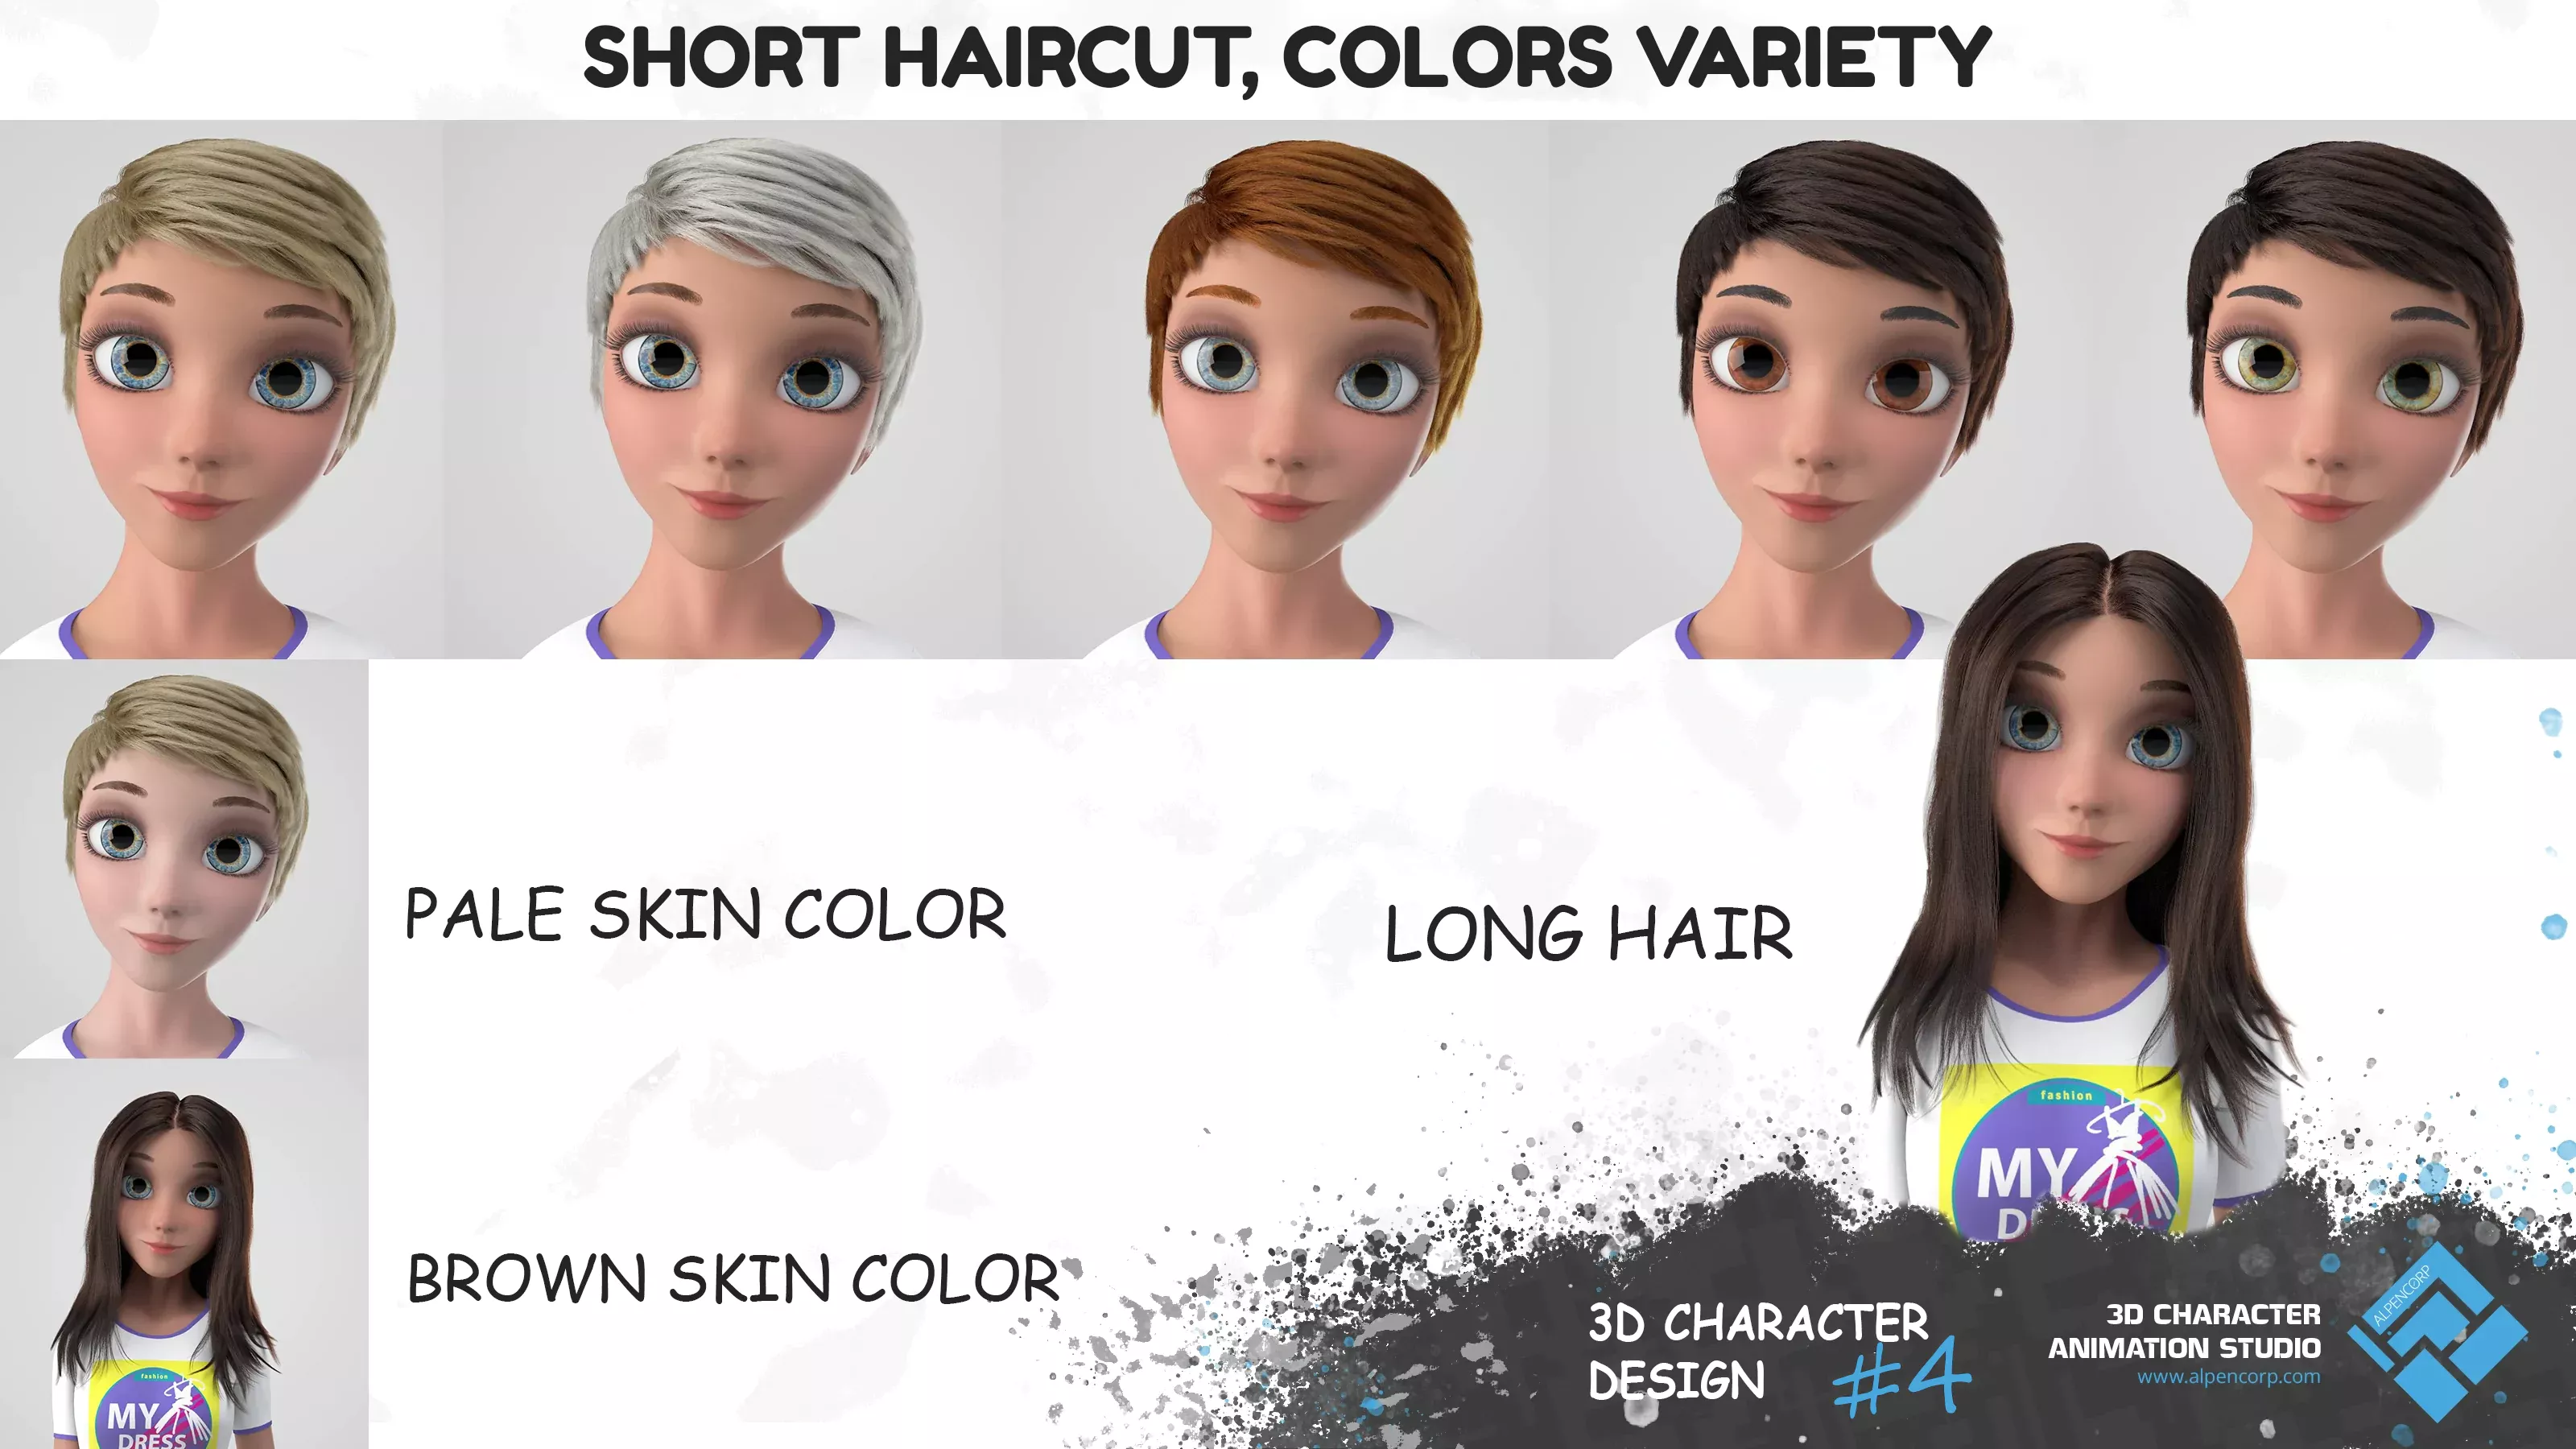 The 3D character for eShop, haircuts and its color variations.